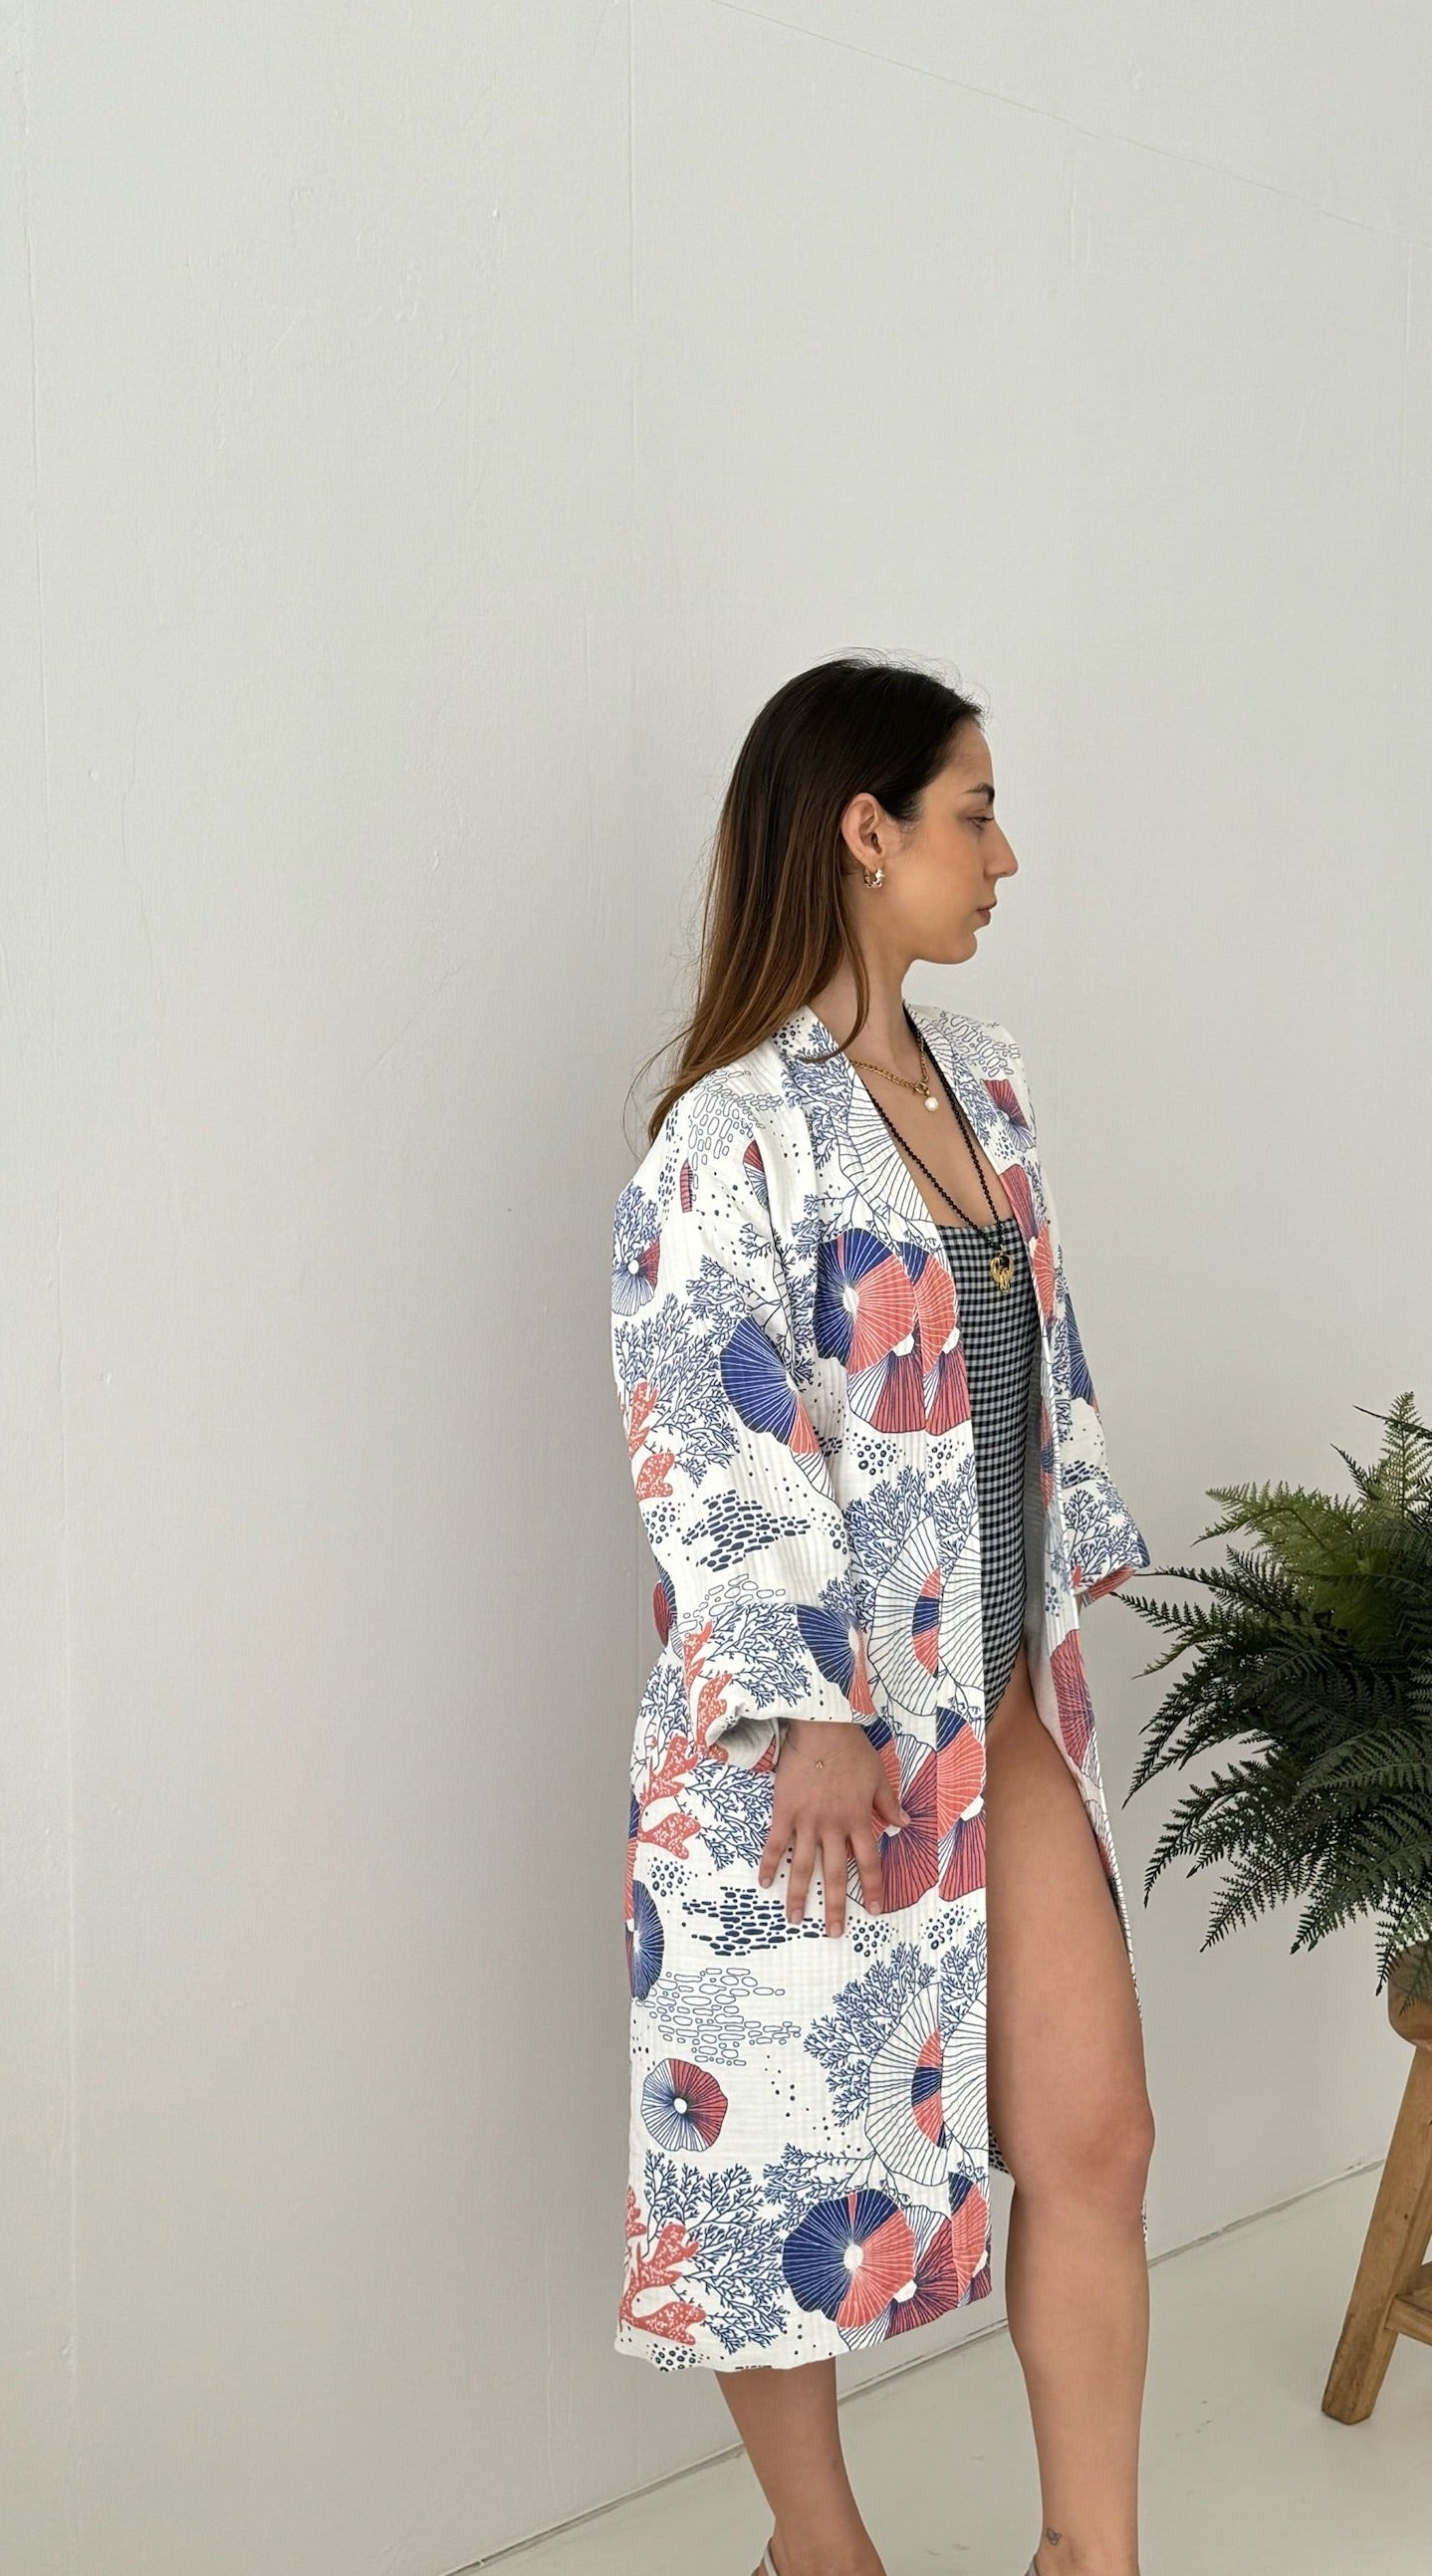 Coral Kimono - 100% cotton with coral pattern in pink and blue, can be used as a bath or home robe but also as a jacket to wear outside